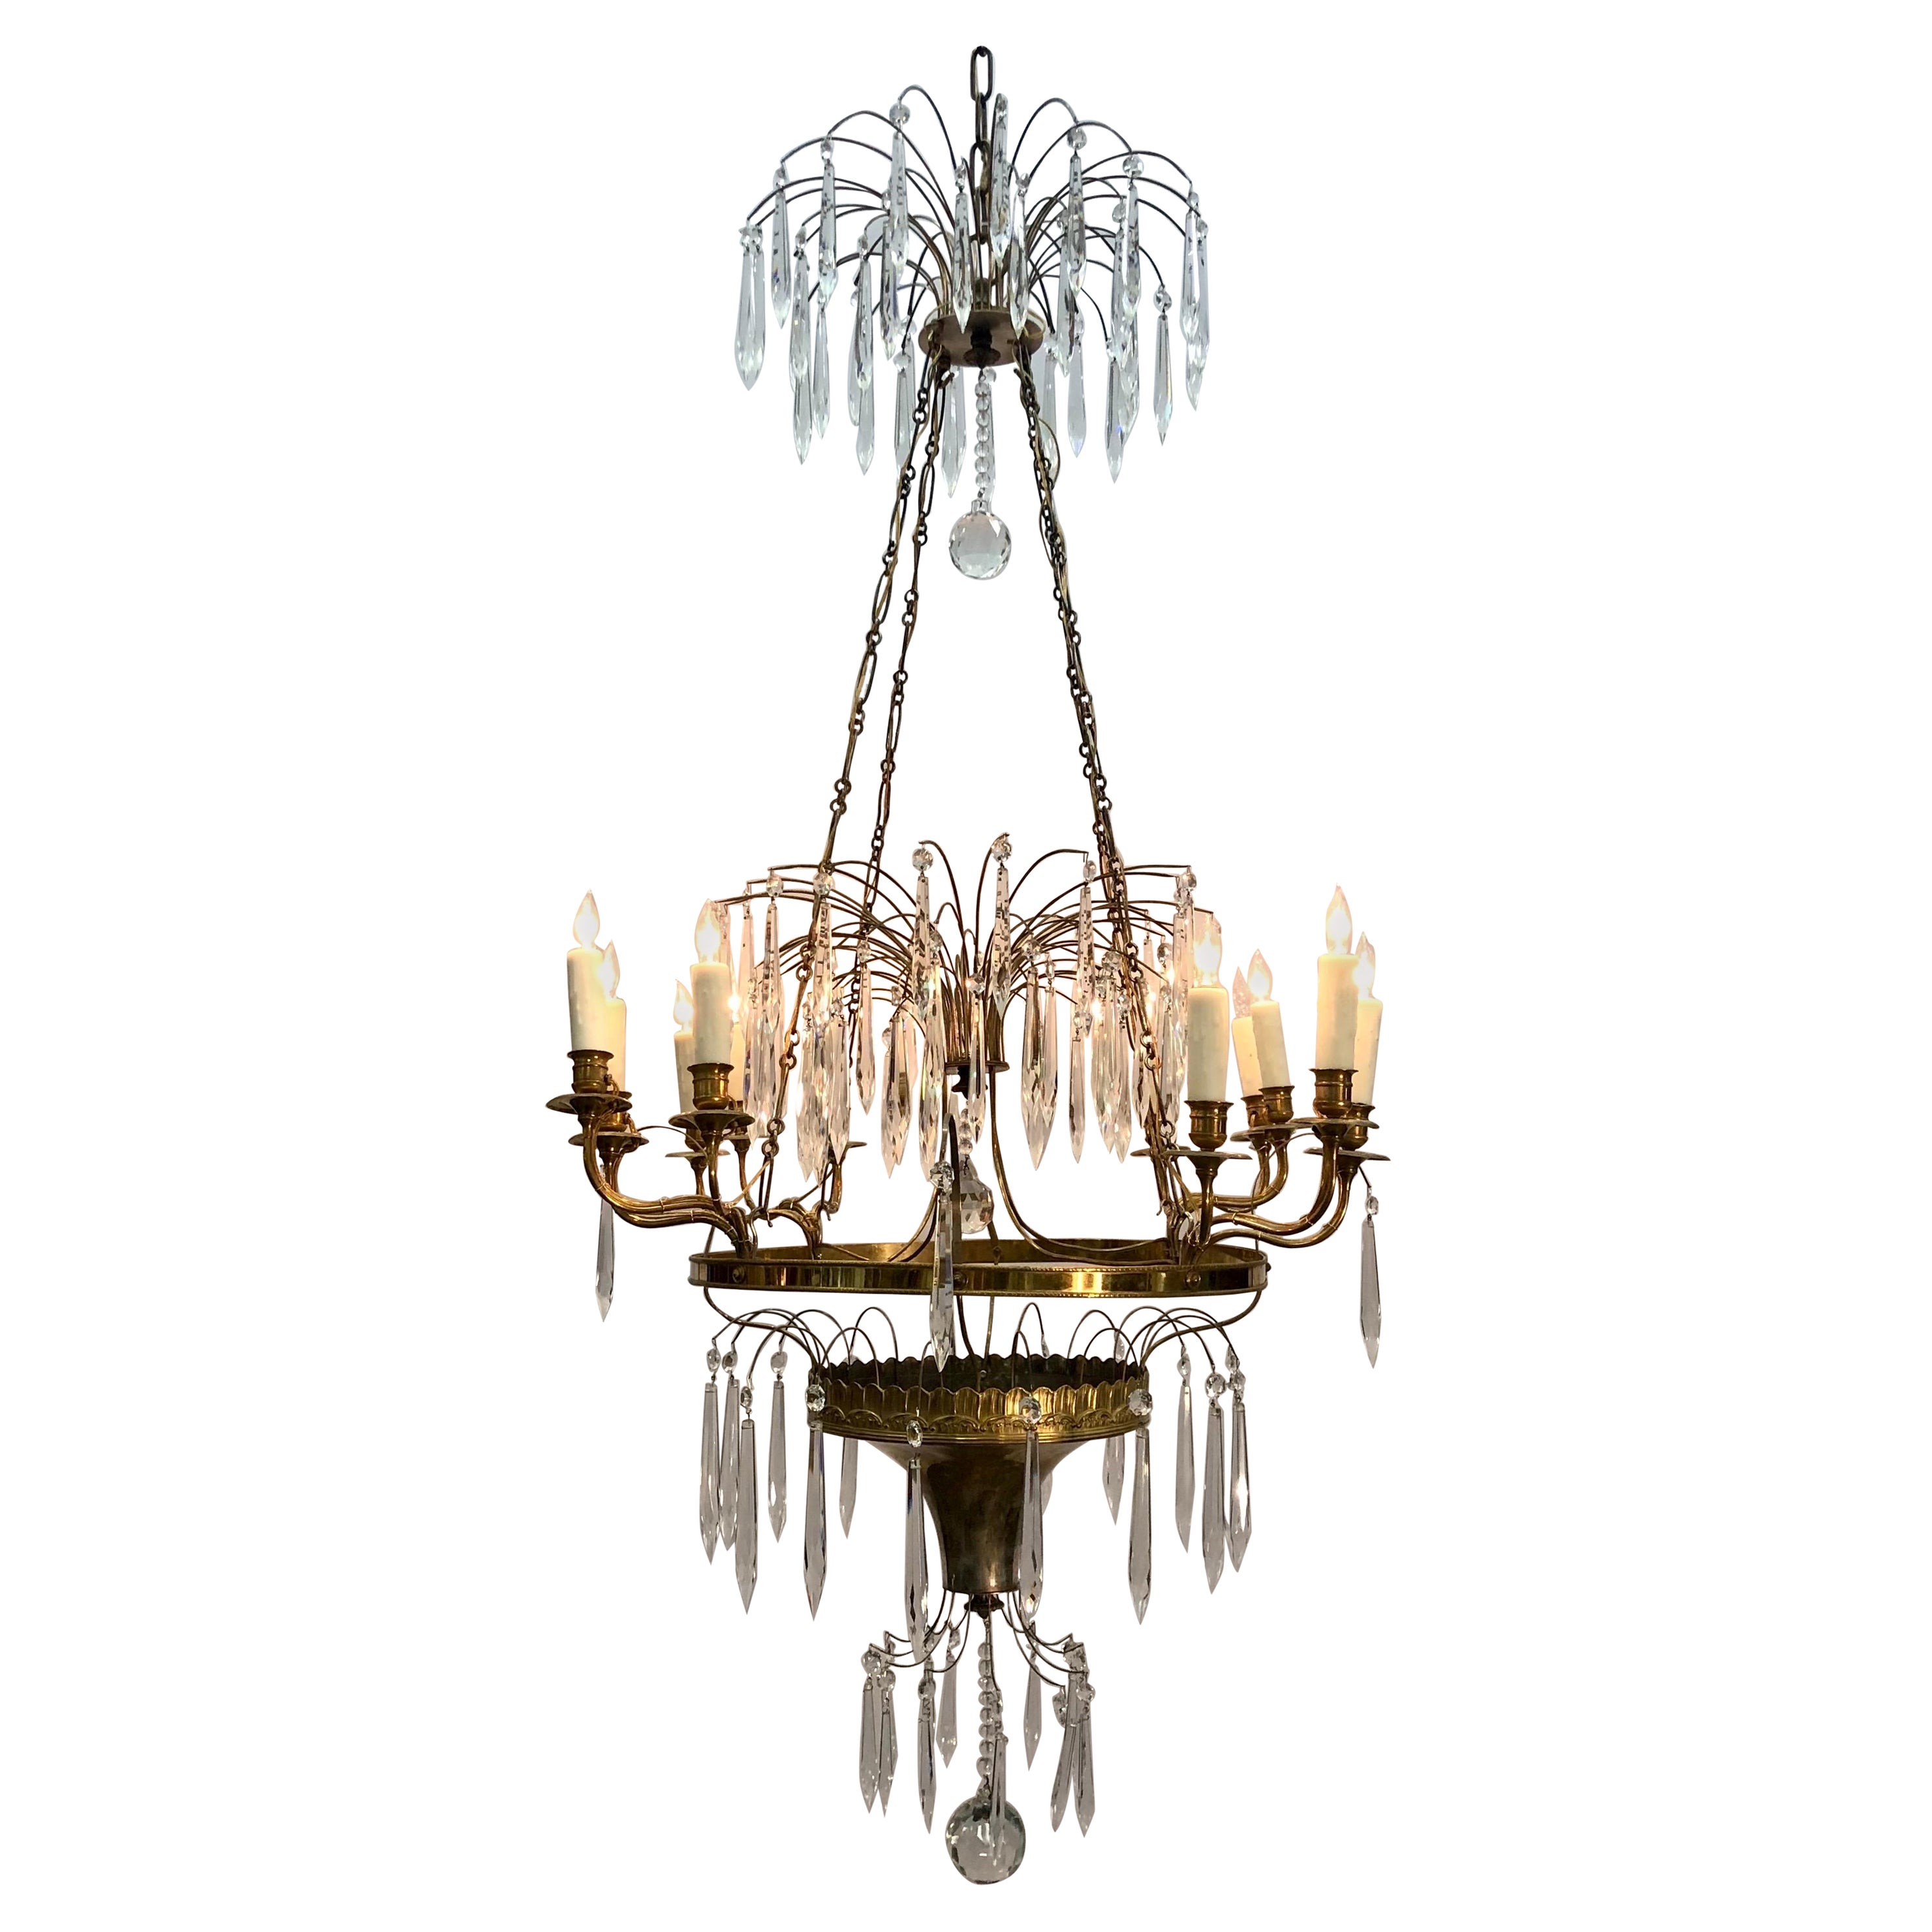 Gustavian / Russian Neoclassical Bronze & Silvered Crystal Chandelier, 19th C. For Sale